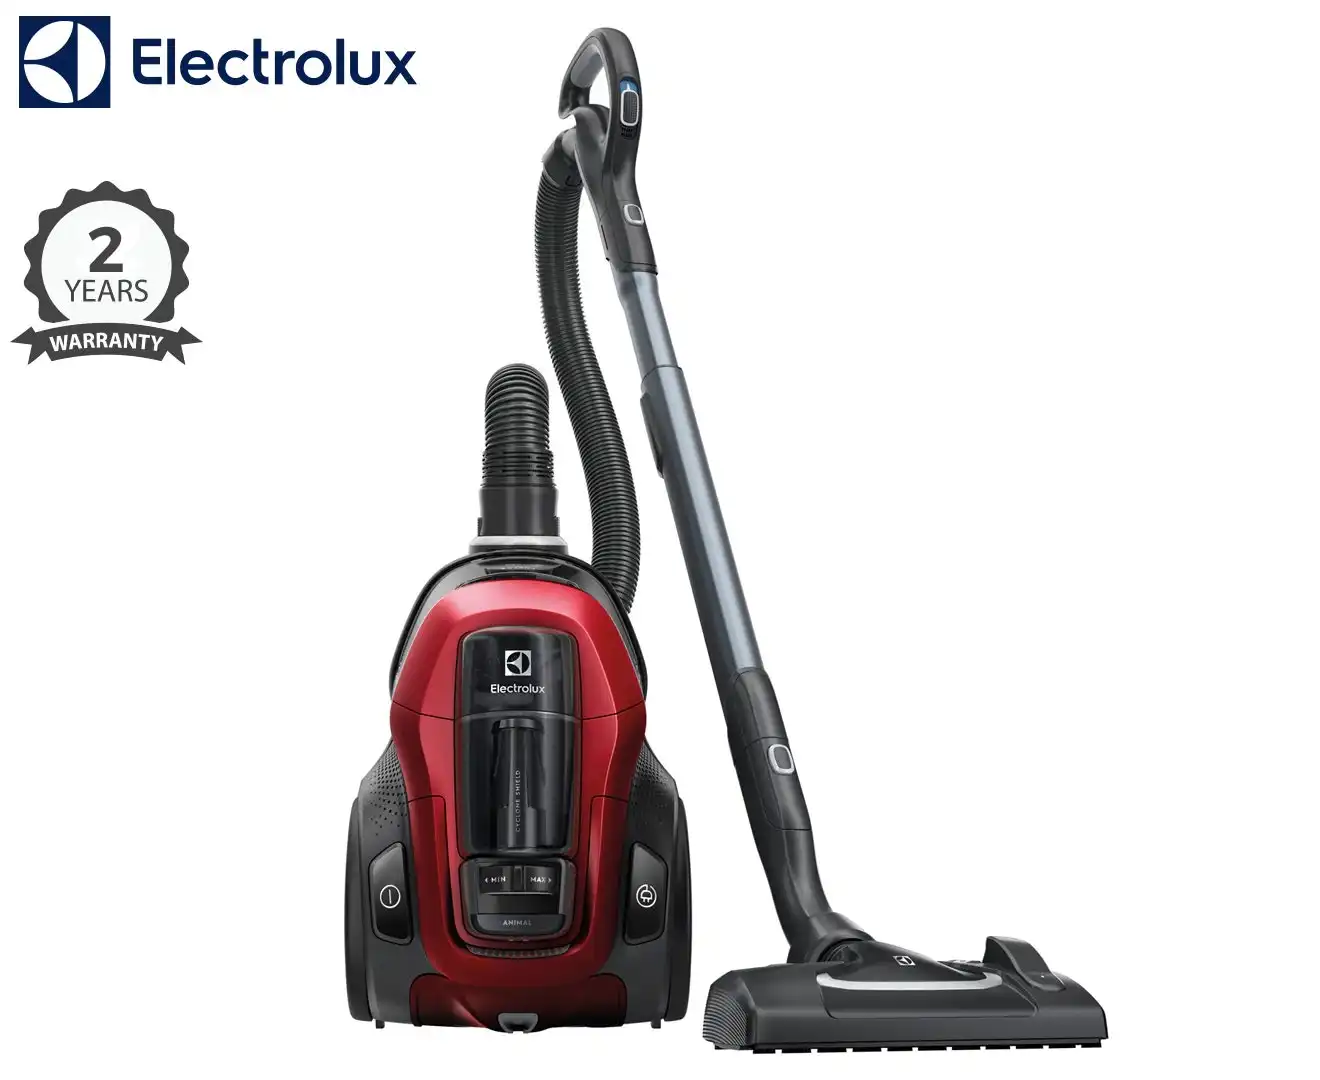 NEW Electrolux Pure C9 Animal Bagless Vacuum Cleaner PC91ANIMAT